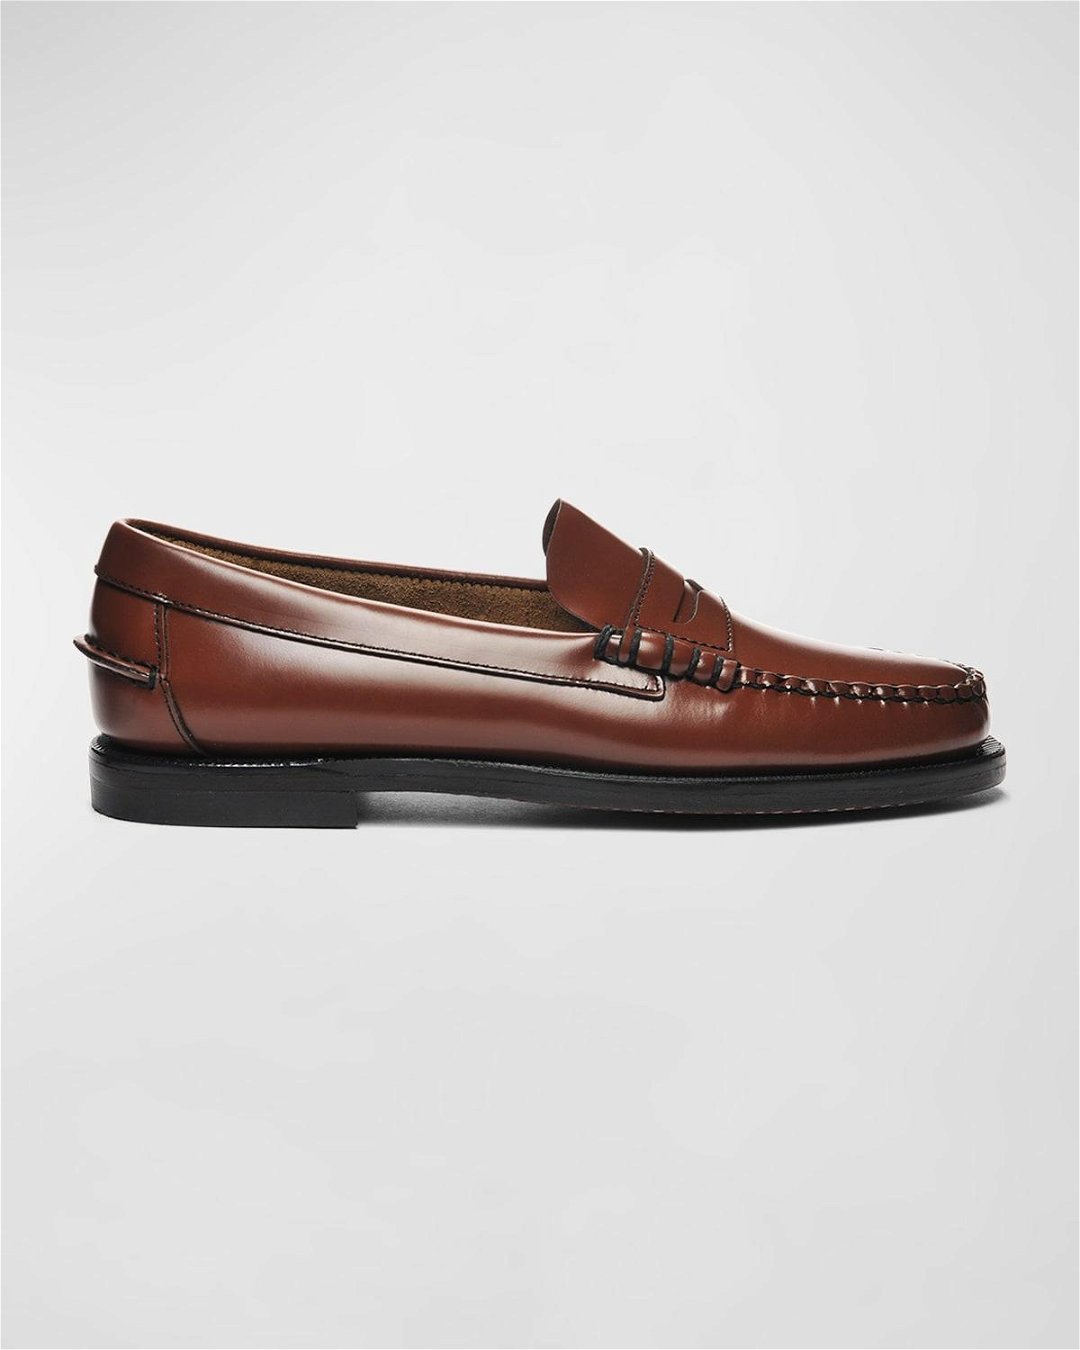 Dan Classic Leather Penny Loafers by SEBAGO | jellibeans